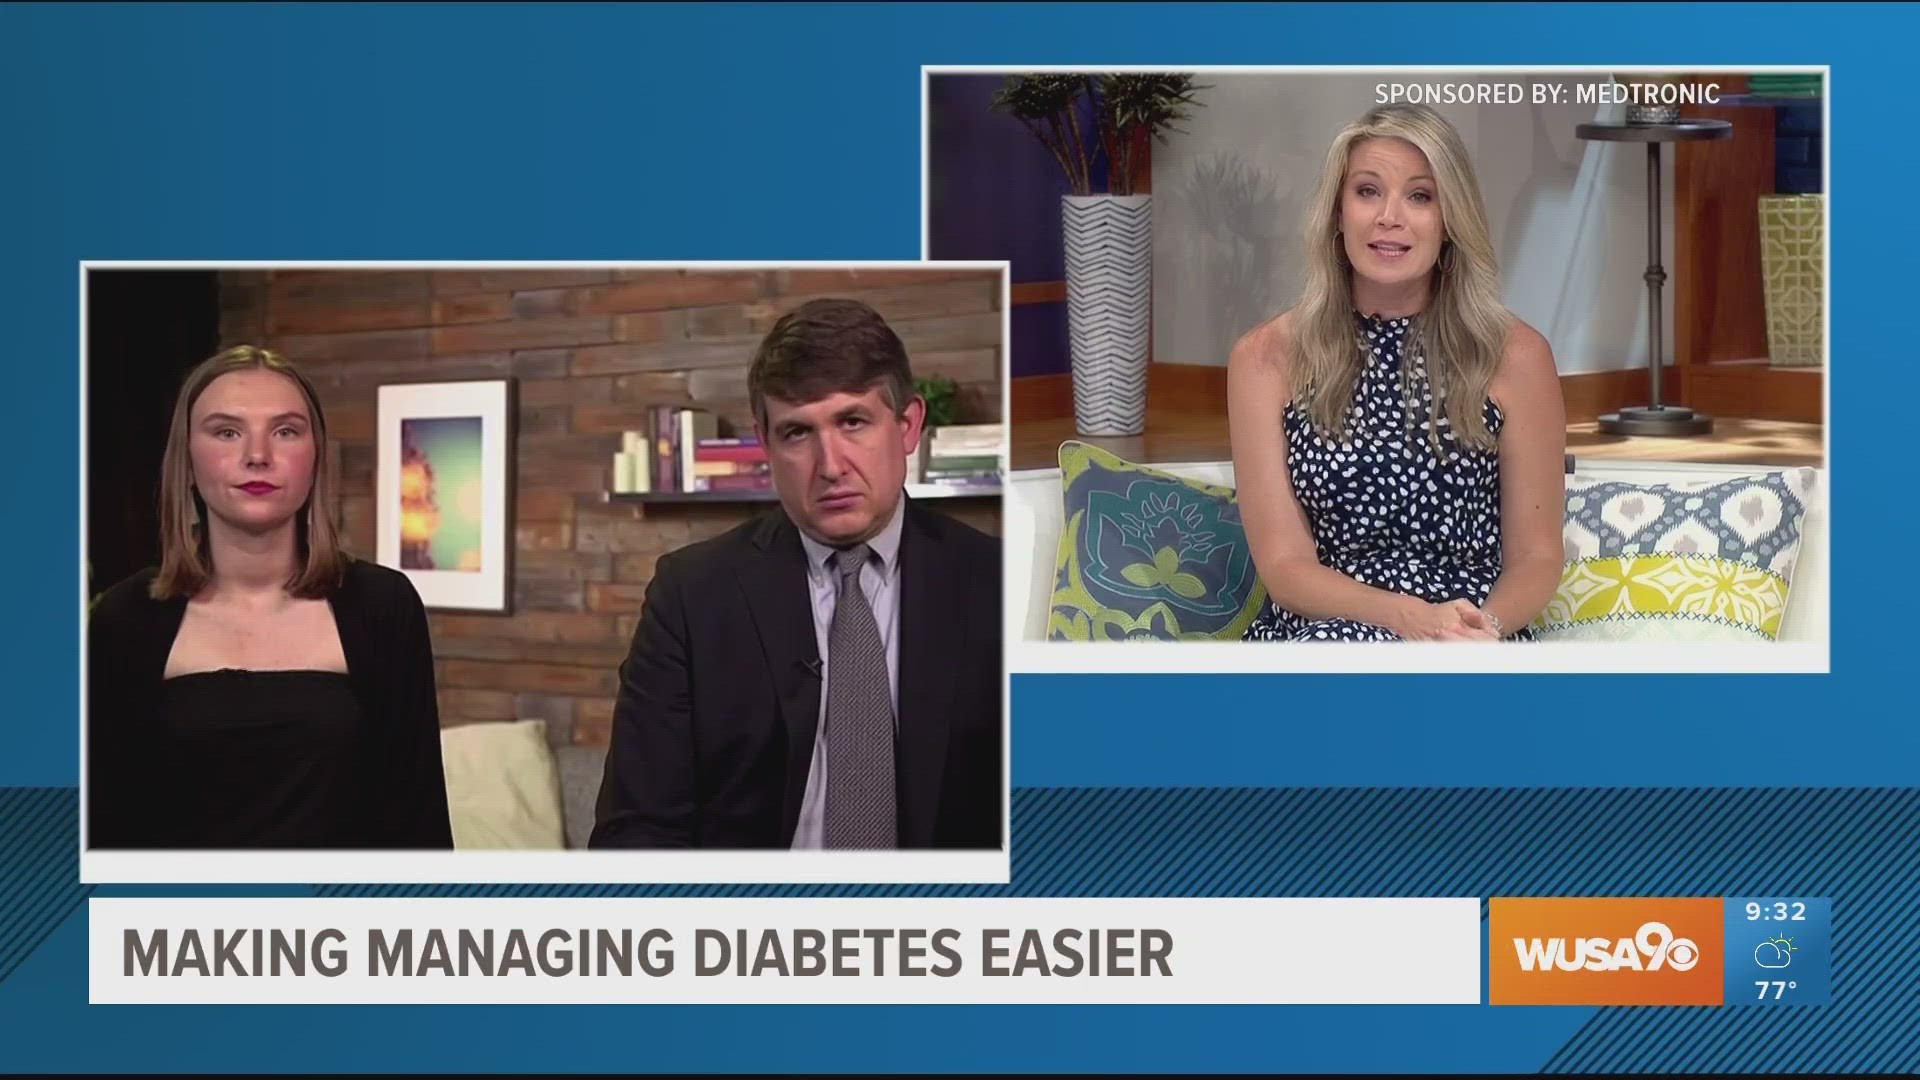 Sponsored by Medtronic. Pediatric Endocrinologist Dr. Greg Forlenza and 15-year-old patient, Izzi, explain how a new insulin pump system helps manage blood sugar.